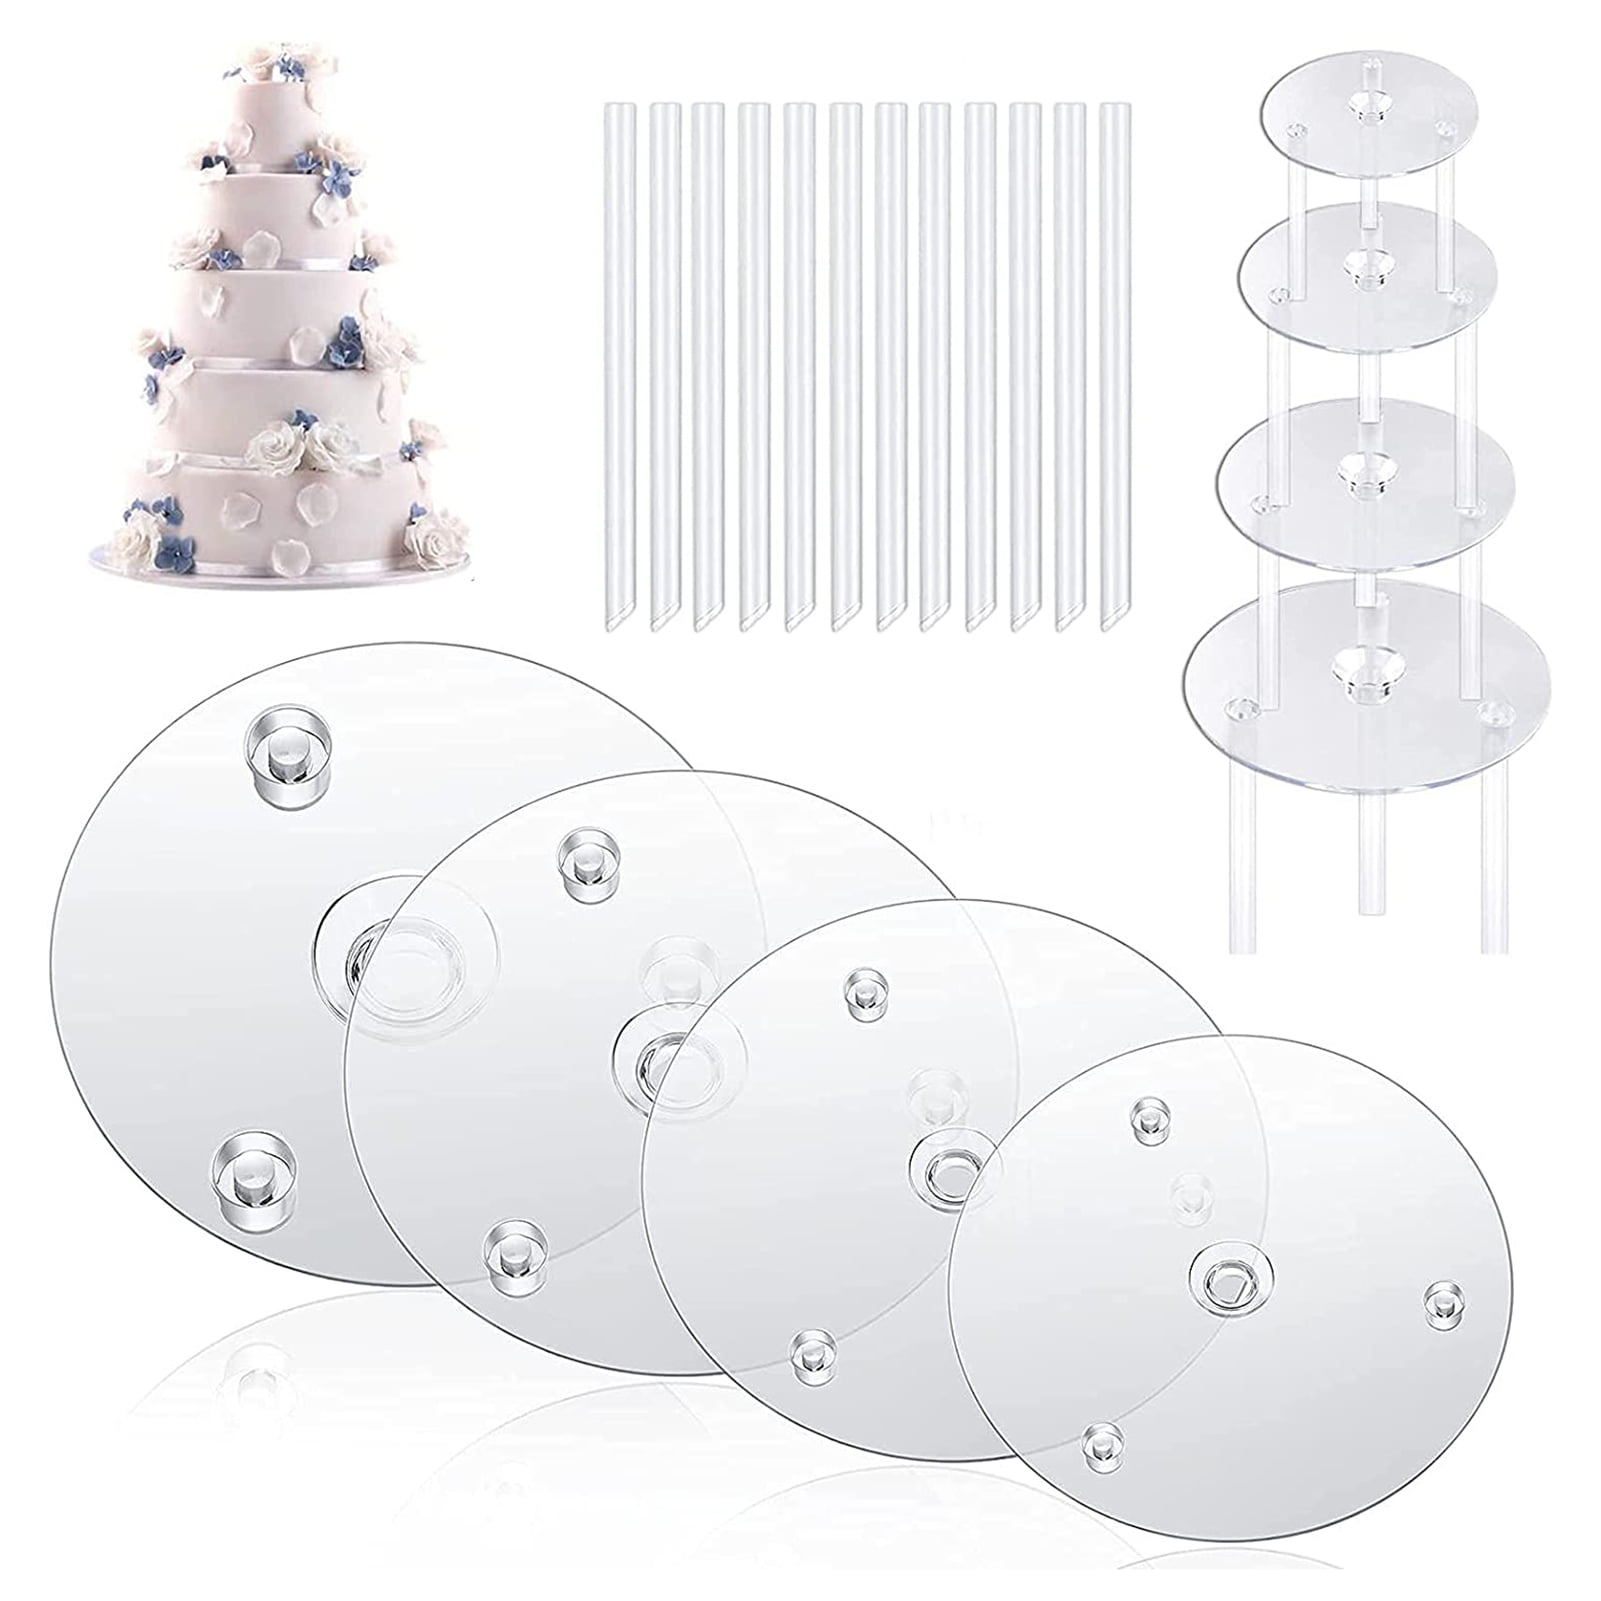 1set Tree Cake Stand Cake Dowels for Tiered Cakes Christmas Tree